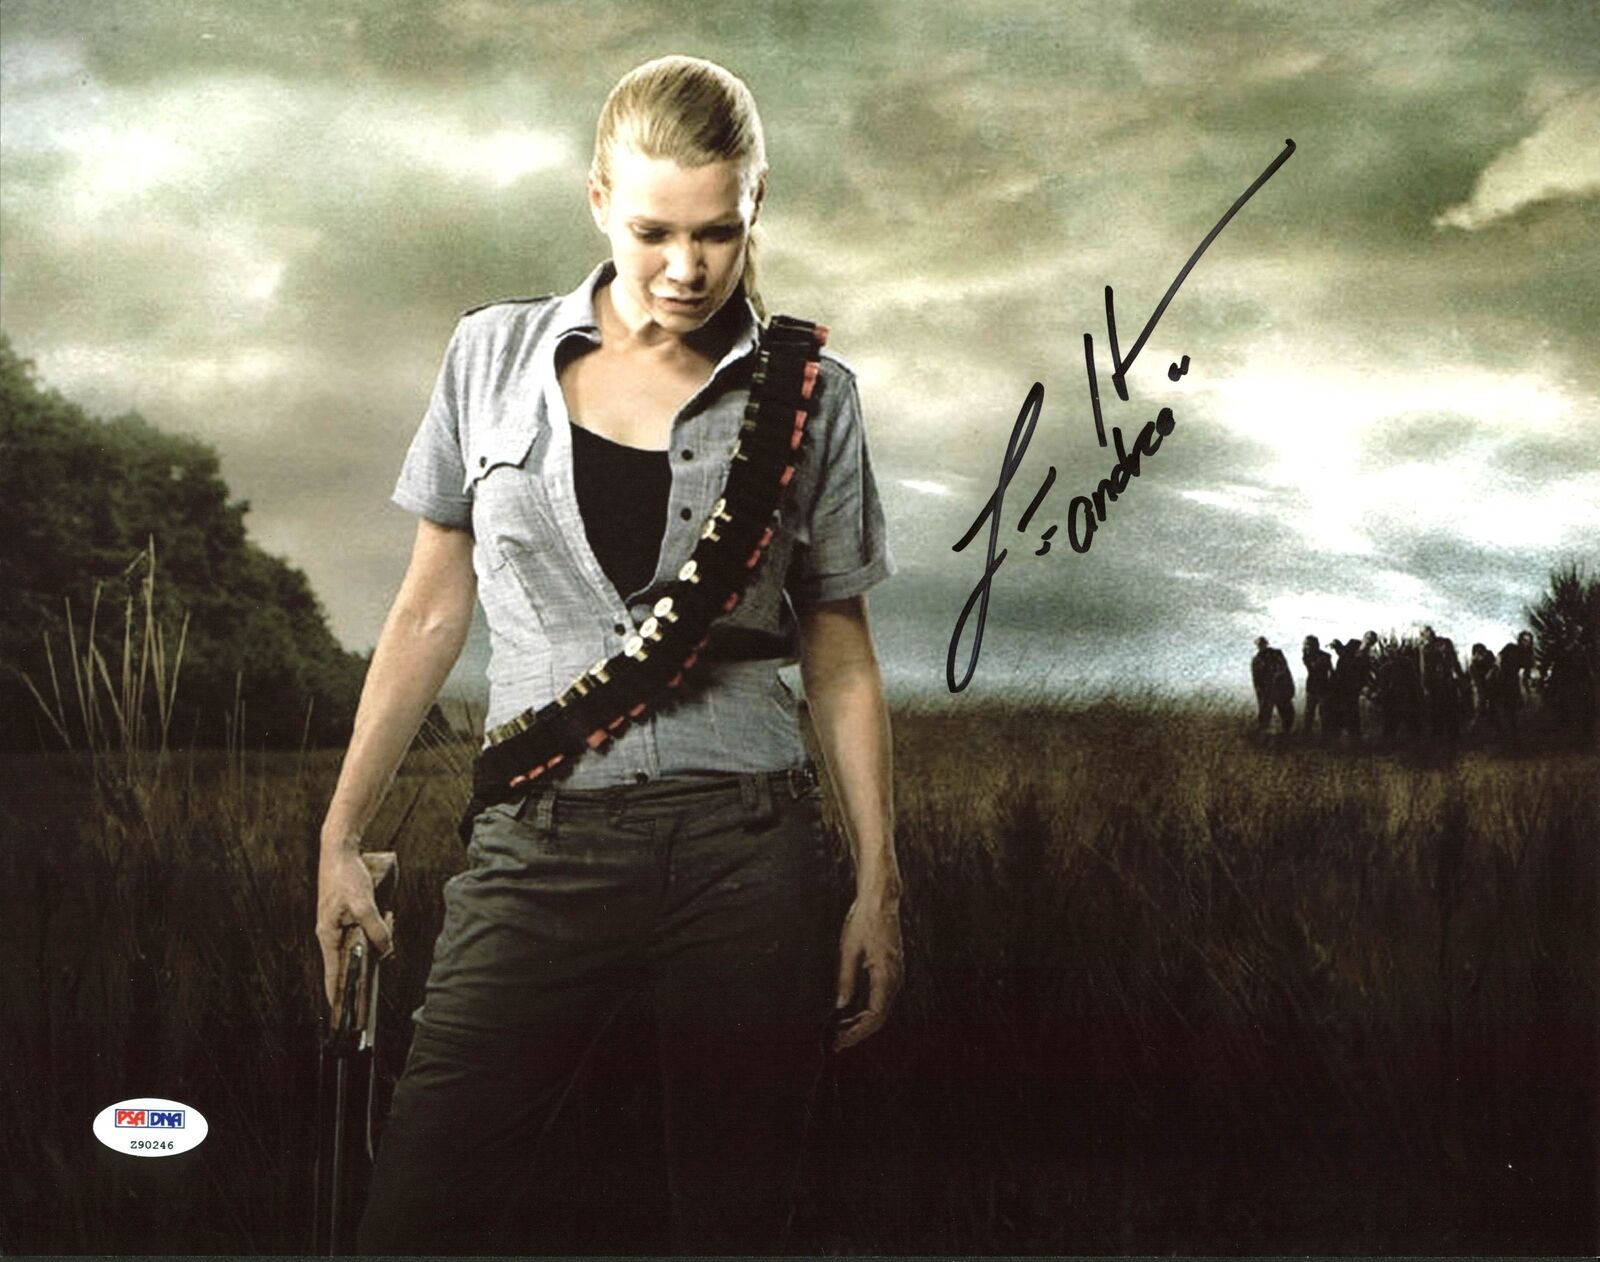 Laurie Holden The Walking Dead Authentic Signed 11X14 Photo Poster painting PSA/DNA #Z90246